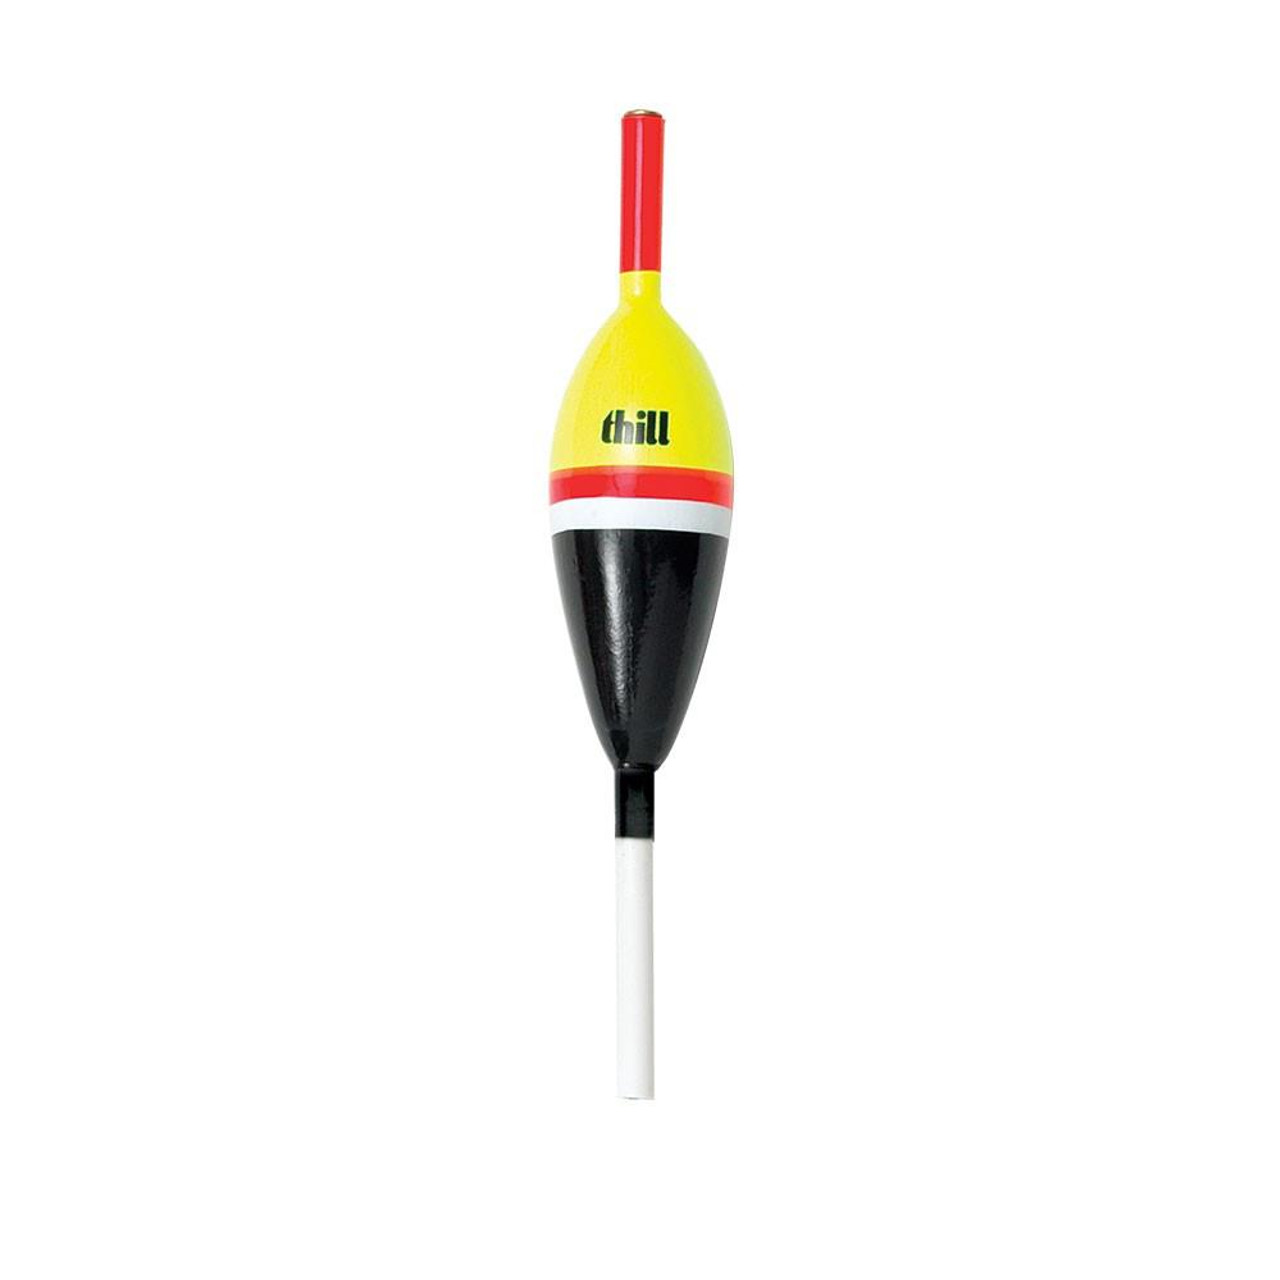 Thill Premium Bobber Stops for Fishing Floats, India